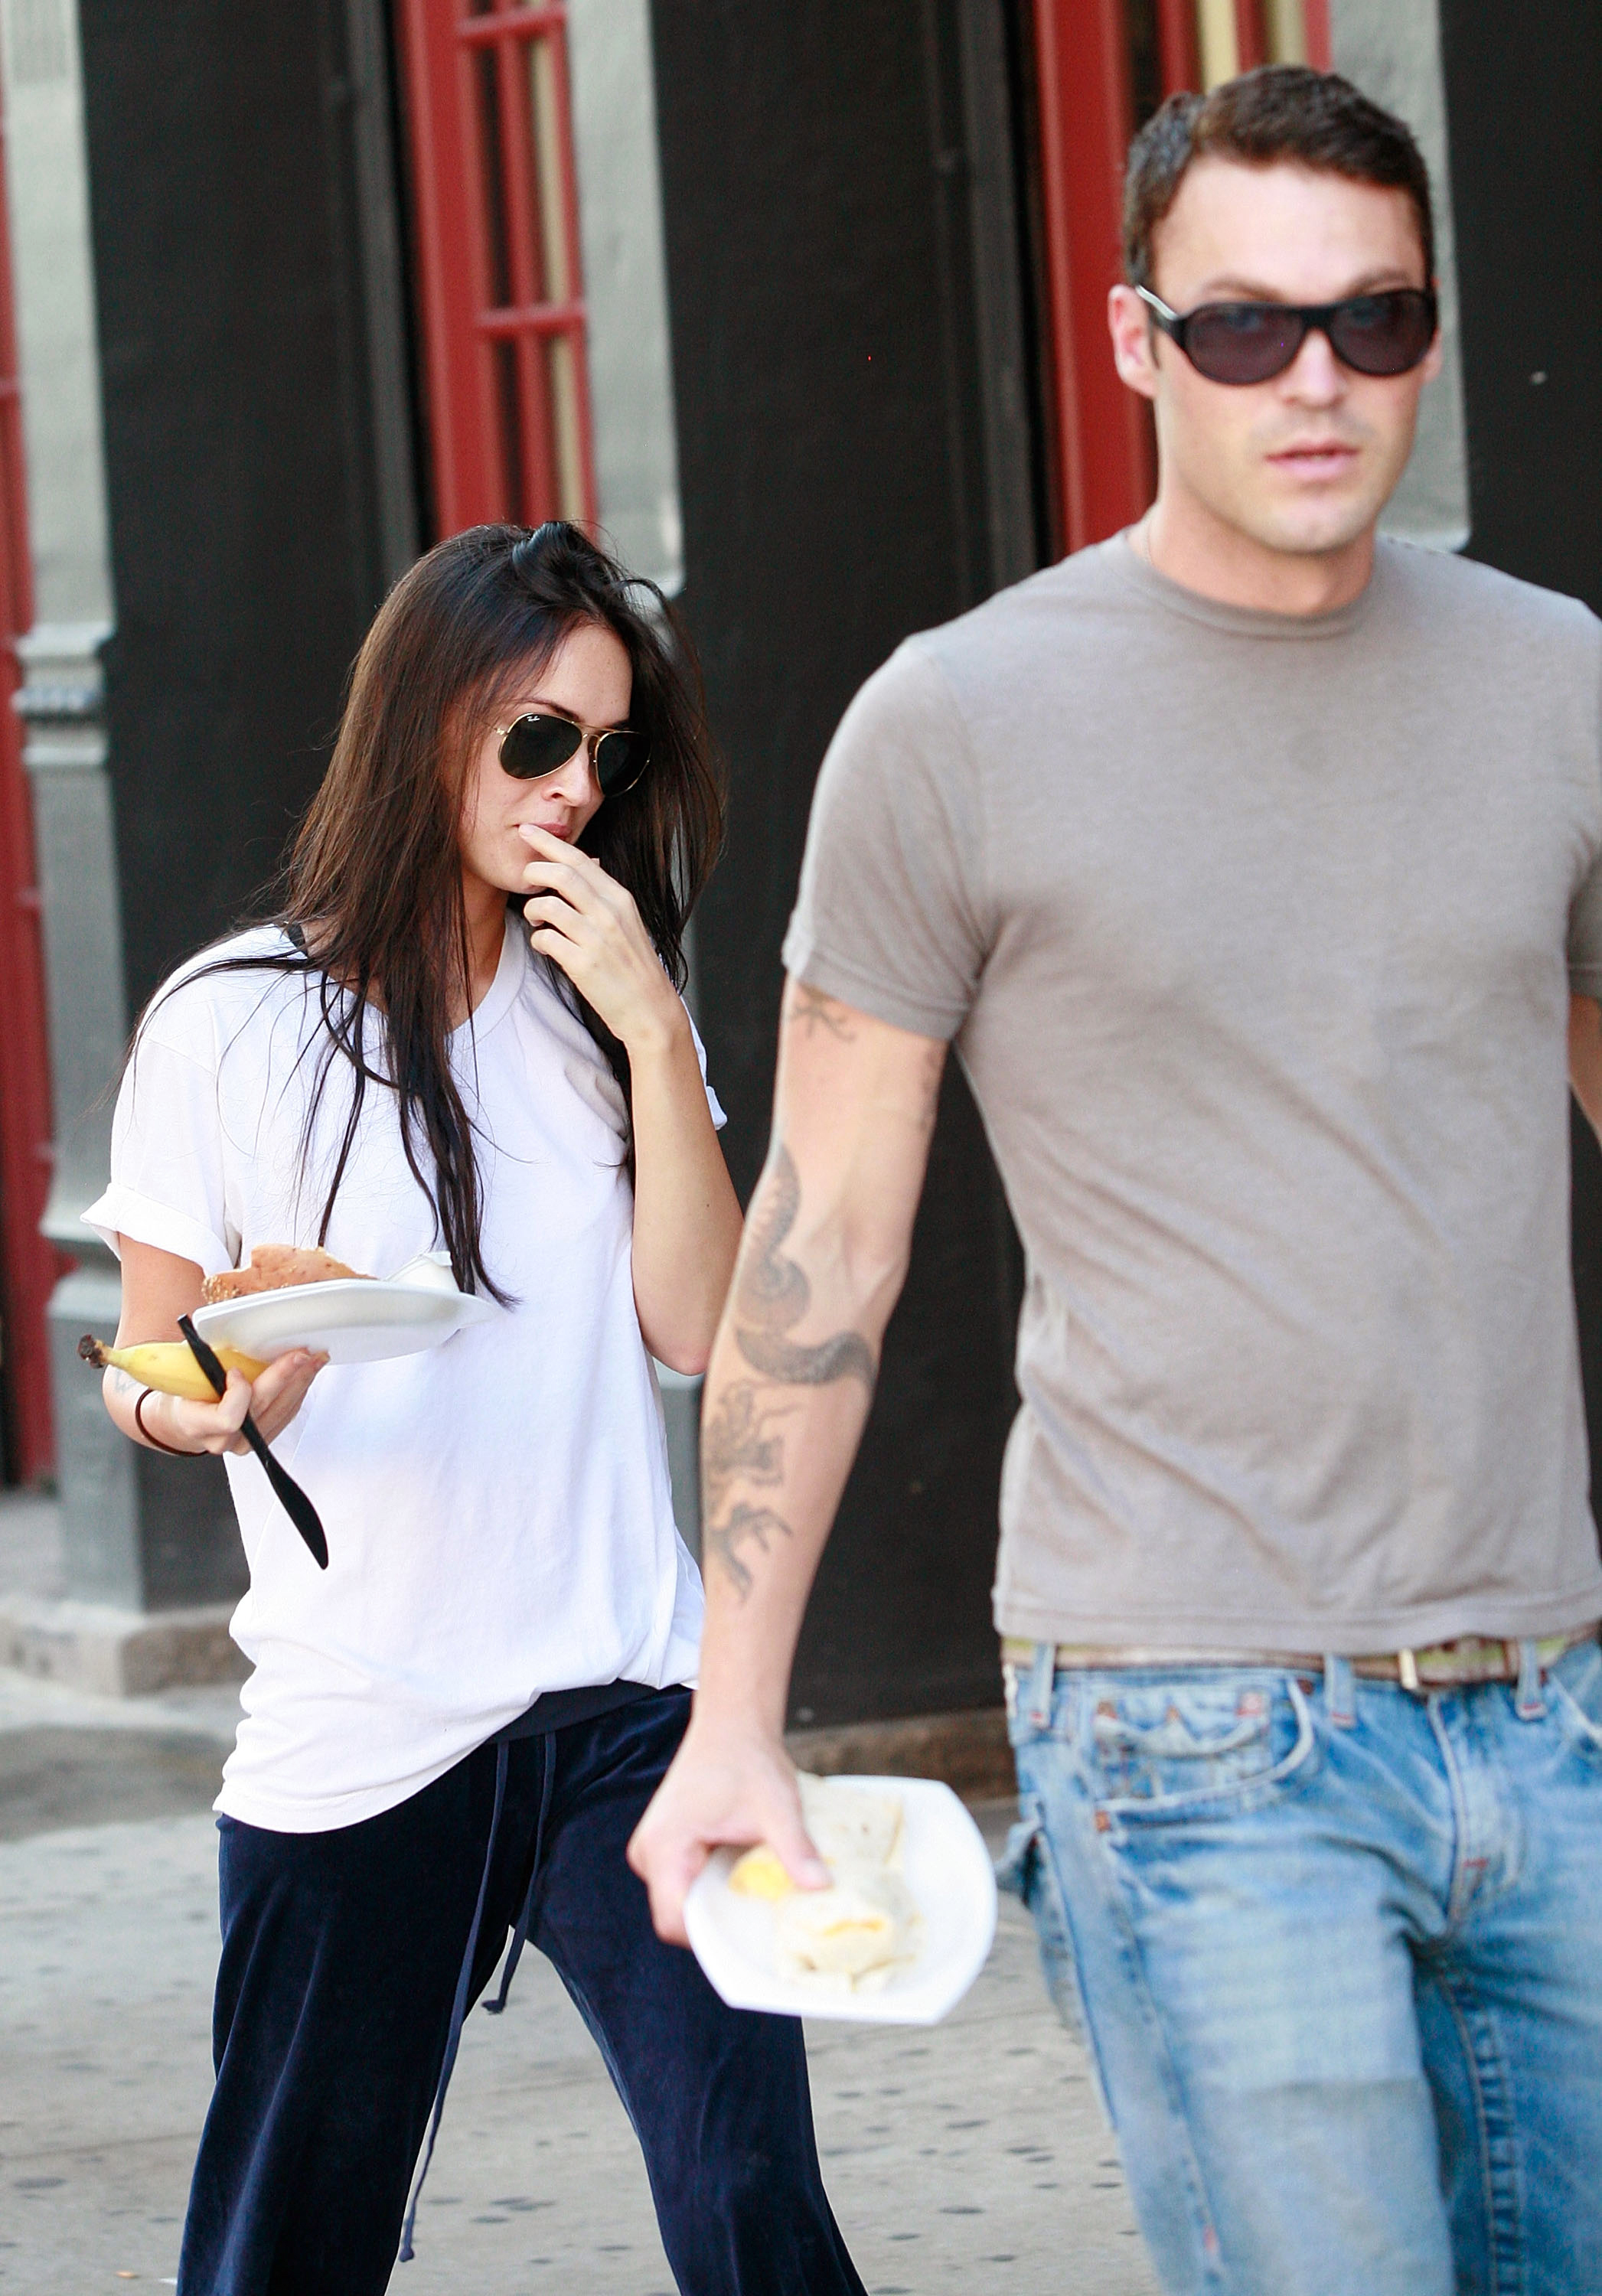 Megan Fox and Brian Austin Green spotted out in New York City on August 13, 2007 | Source: Getty Images